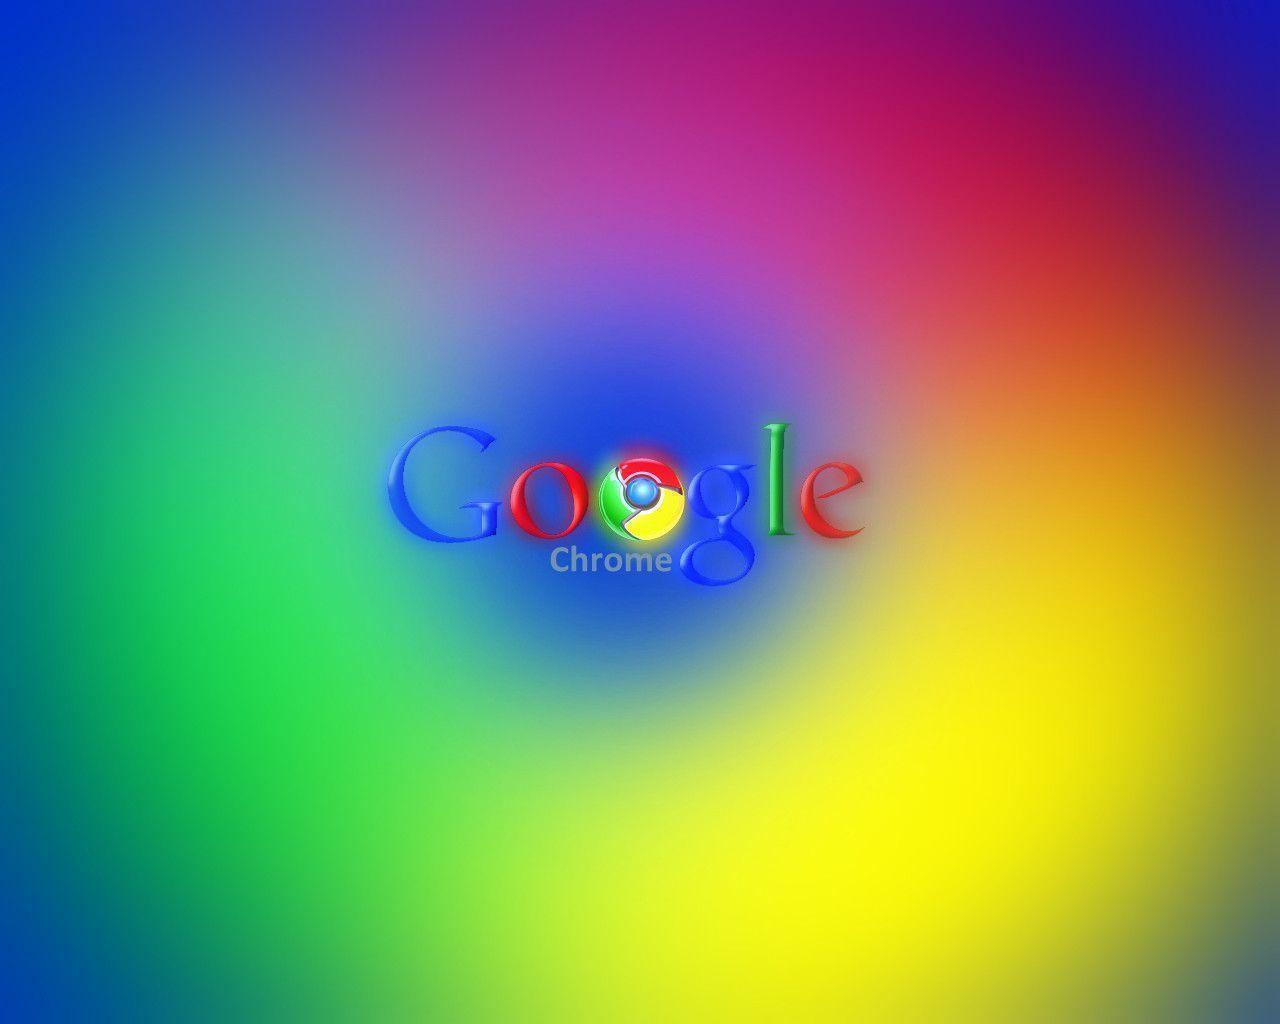 Google Chrome Wallpaper Background 27063 HD Picture. Top